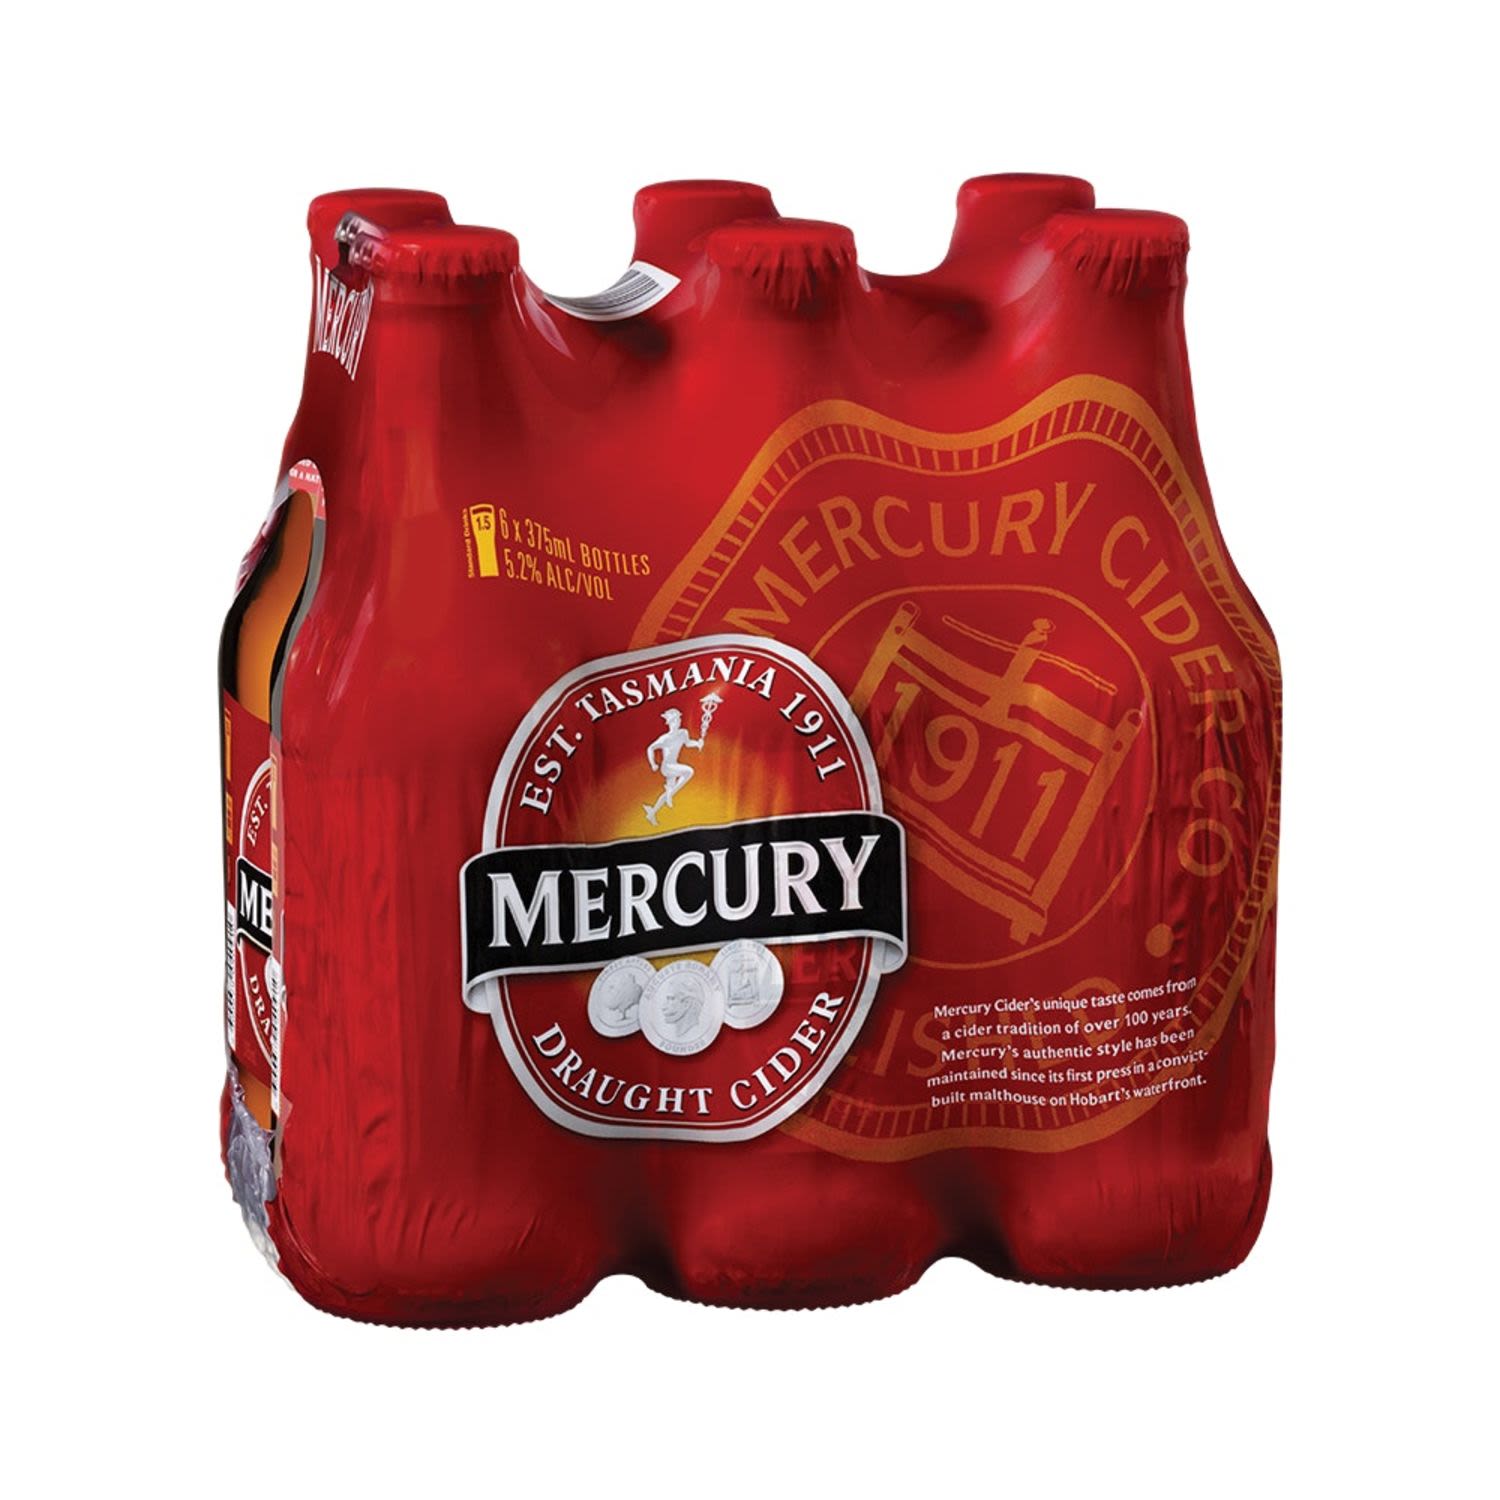 Made in Tasmania, Mercury Draught Cider is the perfect balance of a sweet apple and the cleansing acidity. A great all round Cider.<br /> <br />Alcohol Volume: 5.20%<br /><br />Pack Format: 6 Pack<br /><br />Standard Drinks: 1.5</br /><br />Pack Type: Bottle<br /><br />Country of Origin: Australia<br />